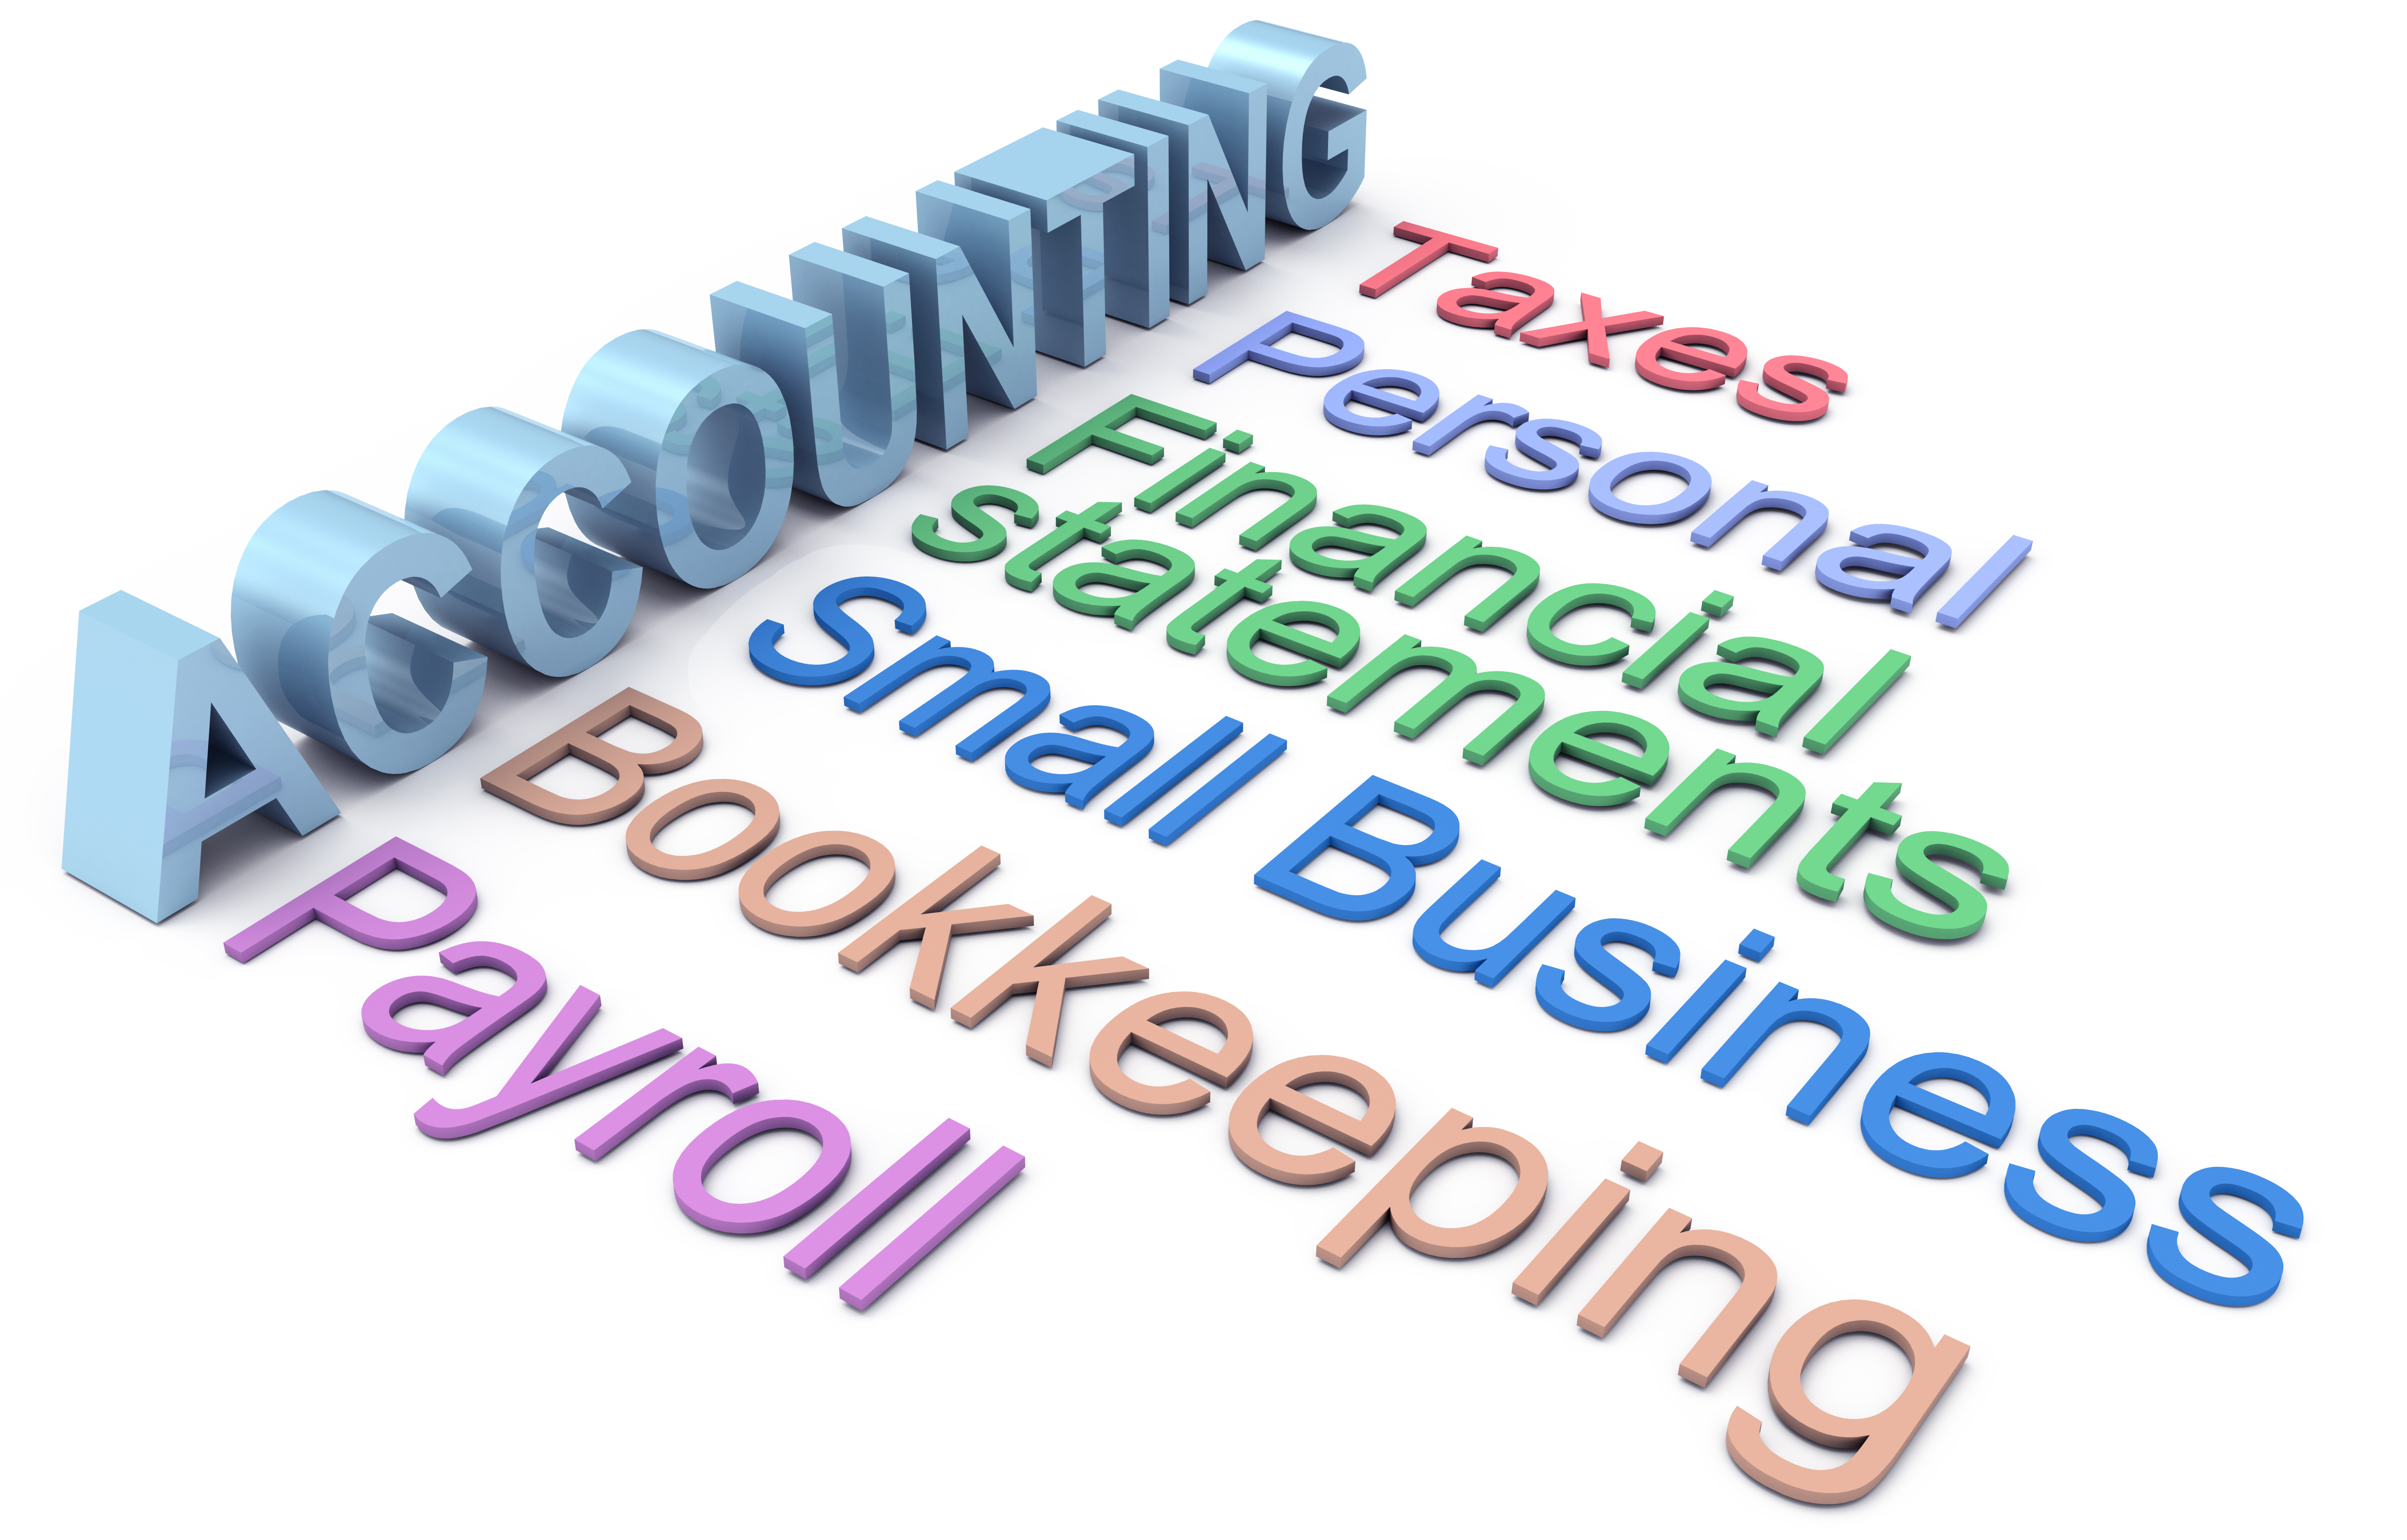 We offer accounting and bookkeeping services, financial statement preparation and payroll services to small businesses.